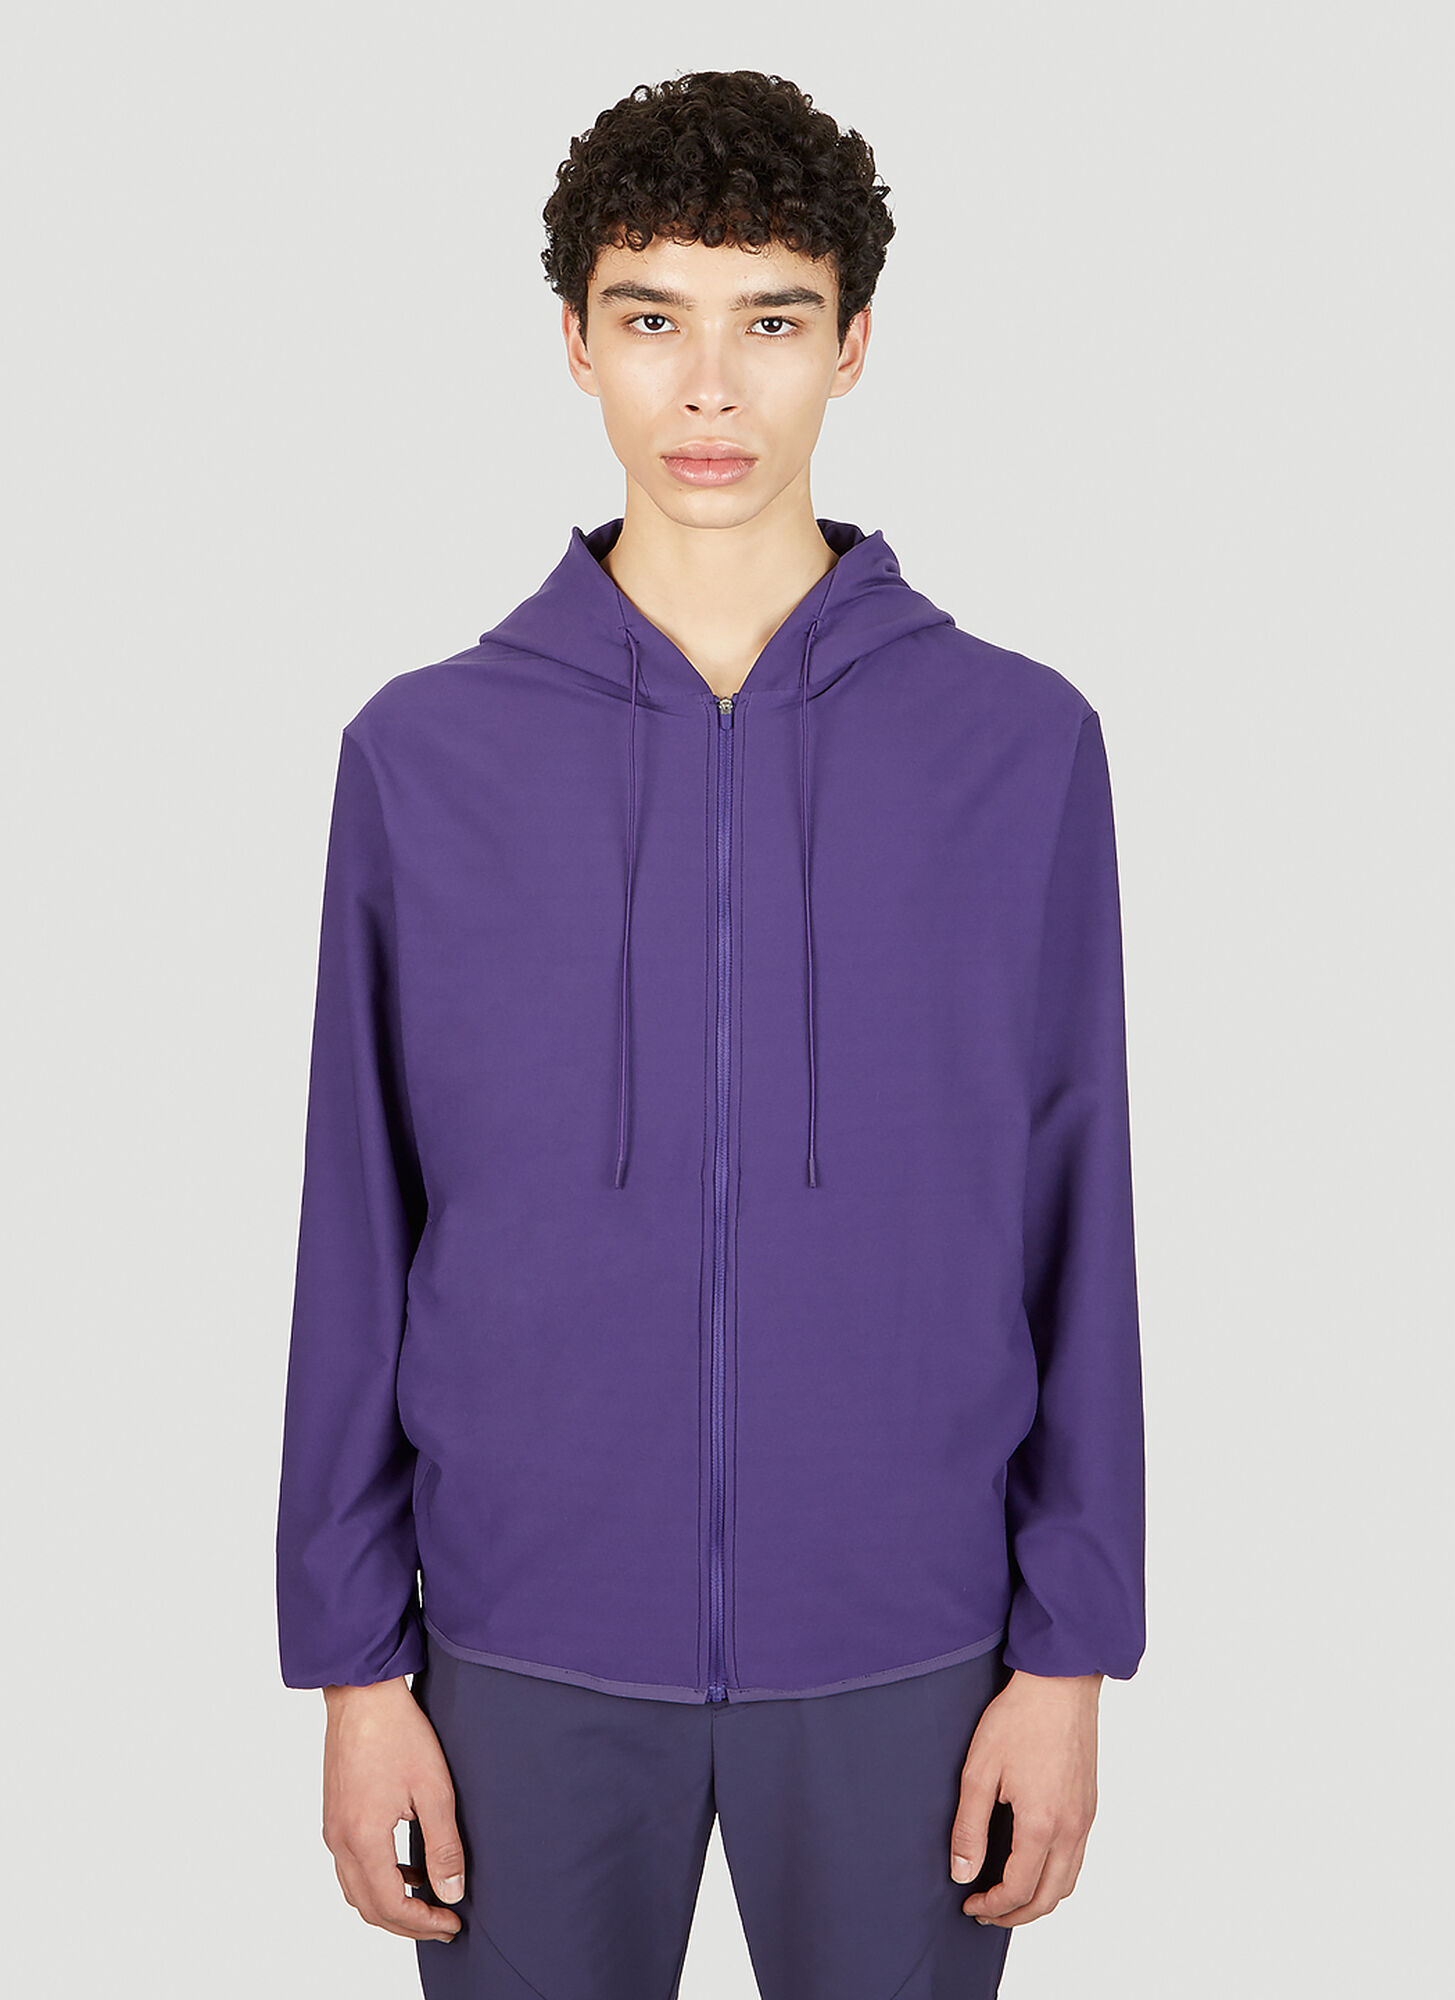 Post Archive Faction (paf) 5.0 Center Hooded Sweatshirt In Purple